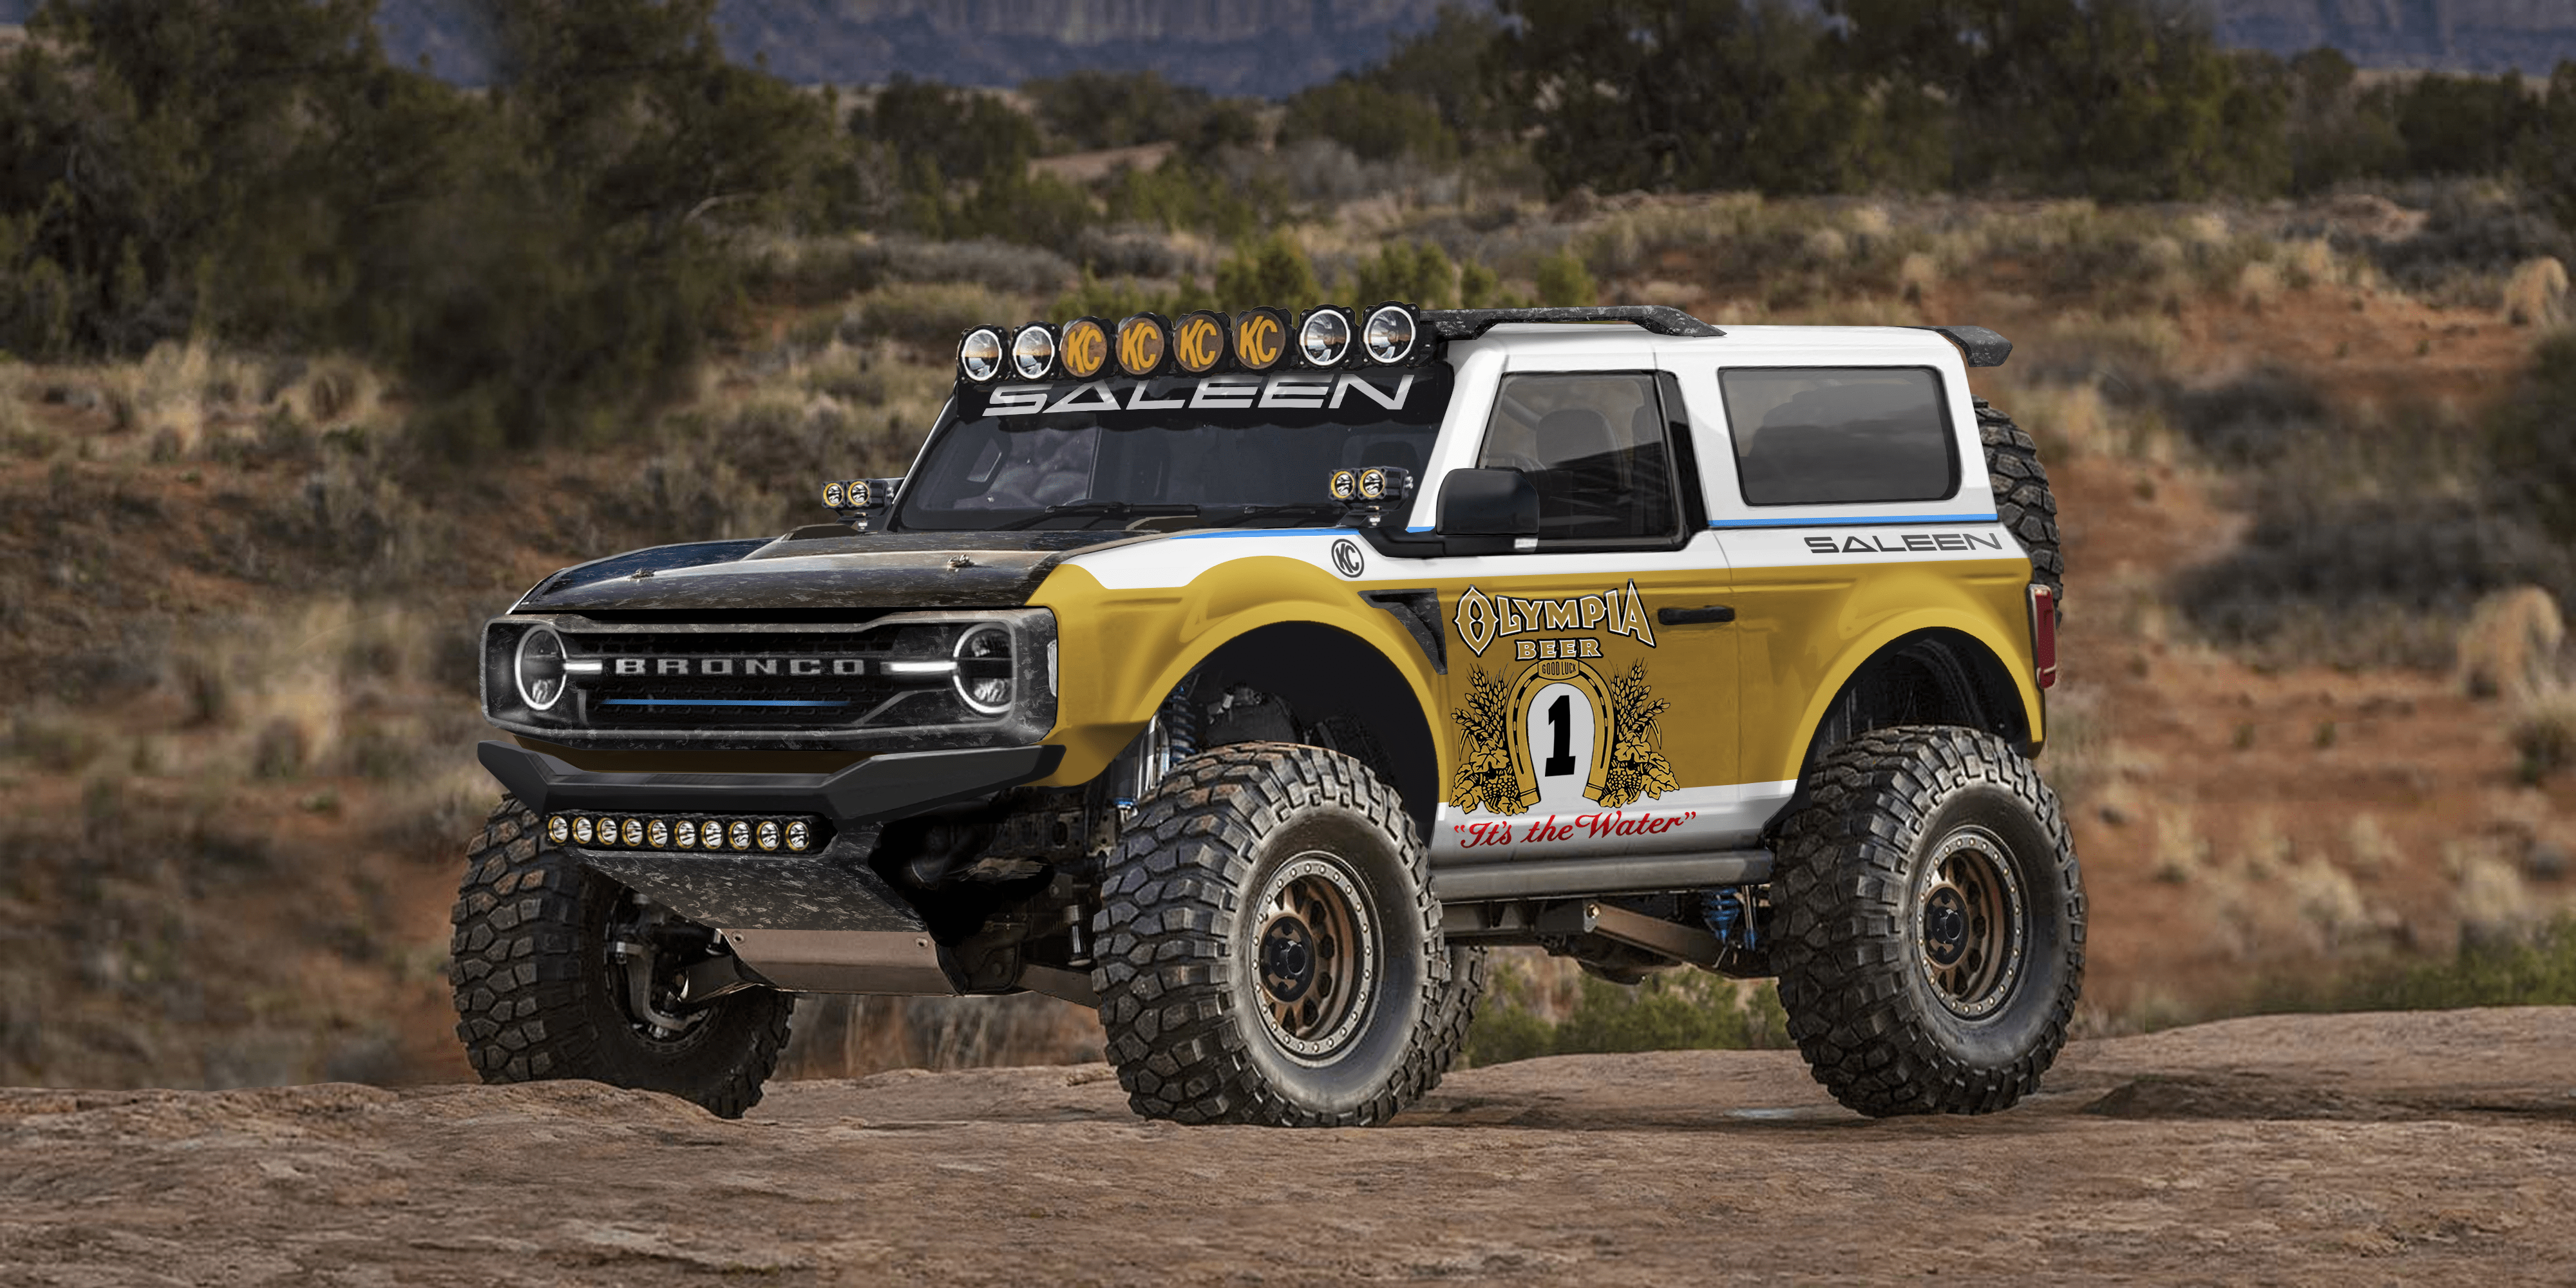 Saleen’s Modified Bronco Seems To Just Be A Hilariously Bad Photoshop